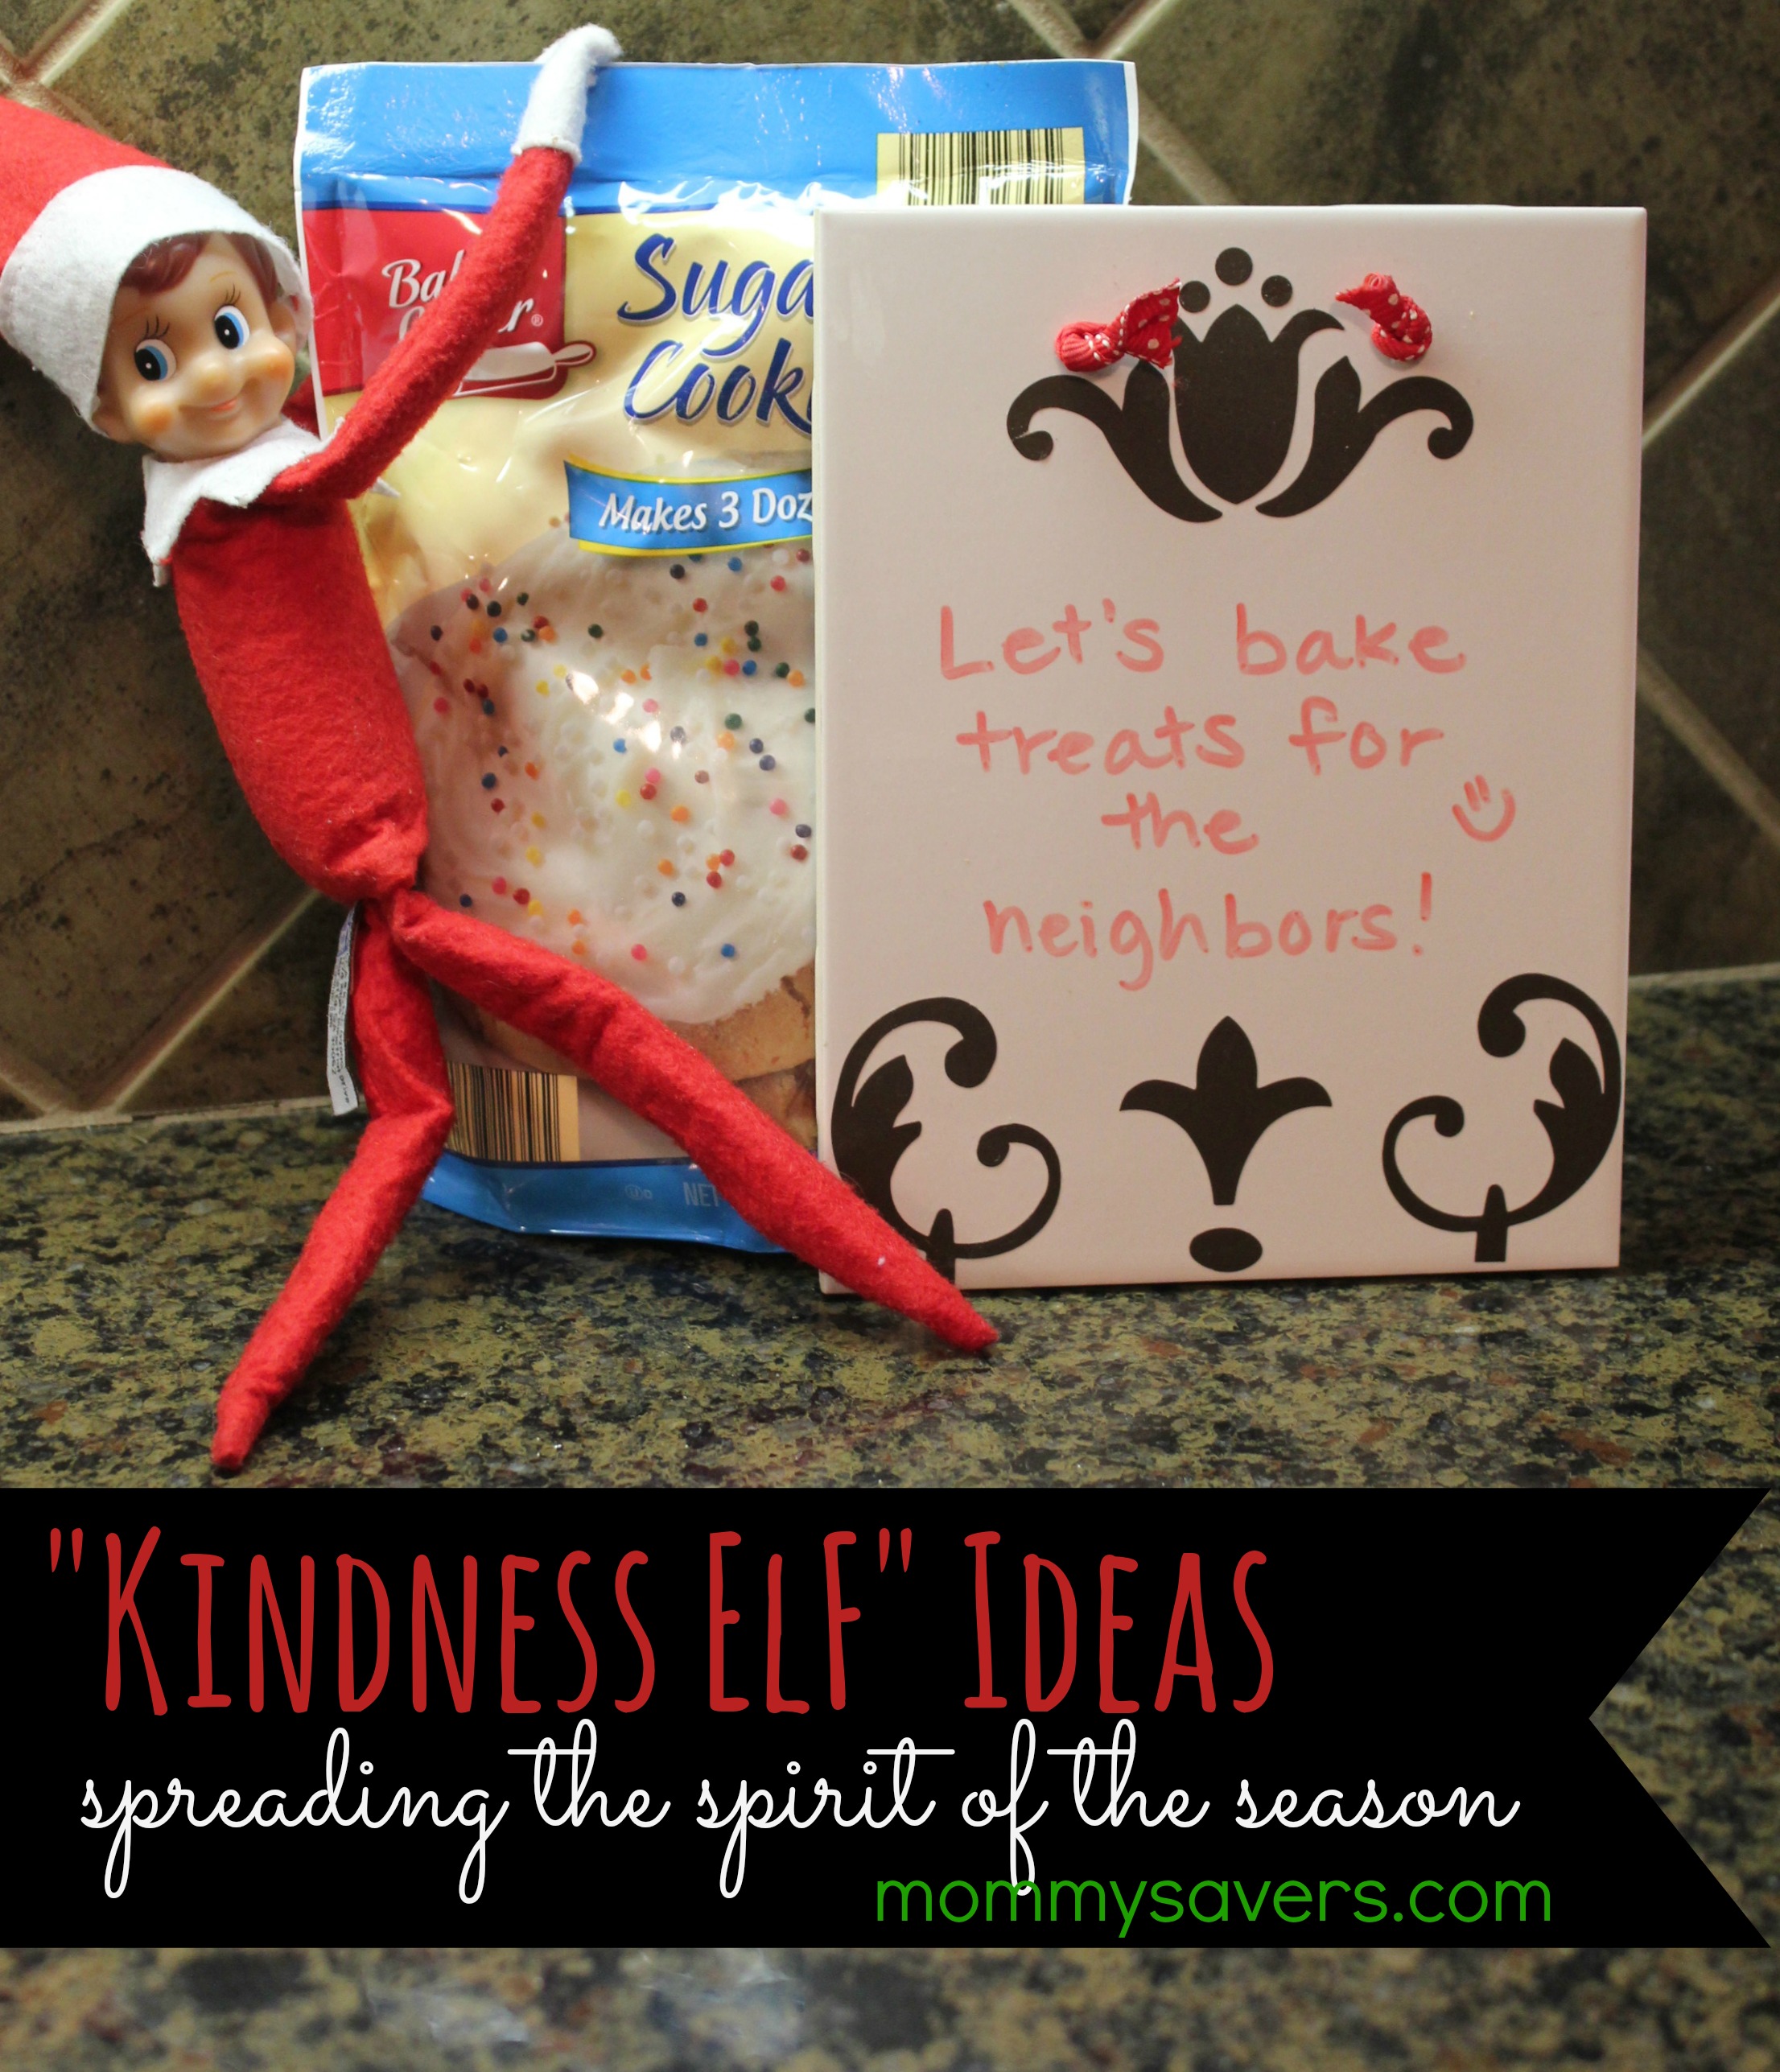 random-acts-of-kindness-ideas-for-kids-mommysavers